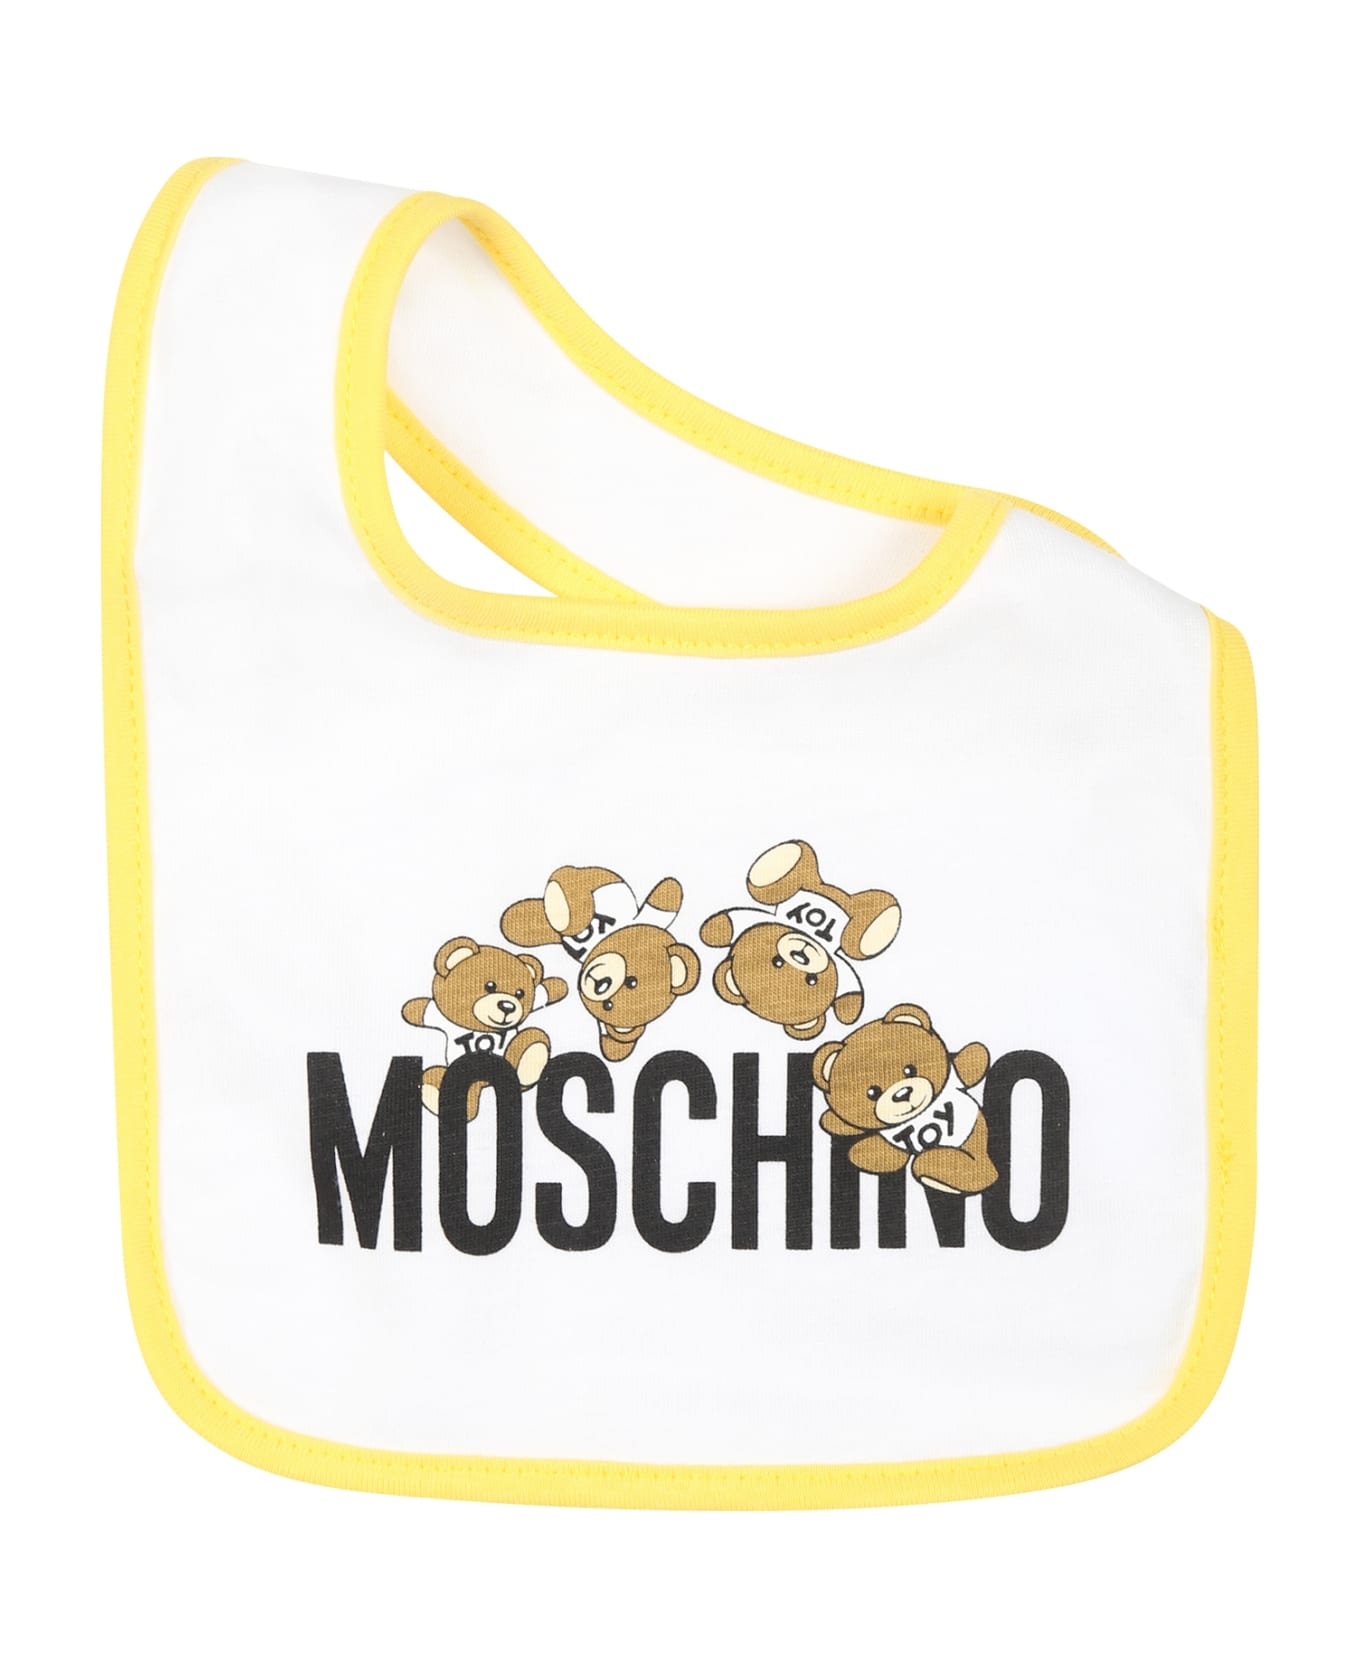 Moschino White Set For Babykids With Teddy Bear And Logo - White アクセサリー＆ギフト